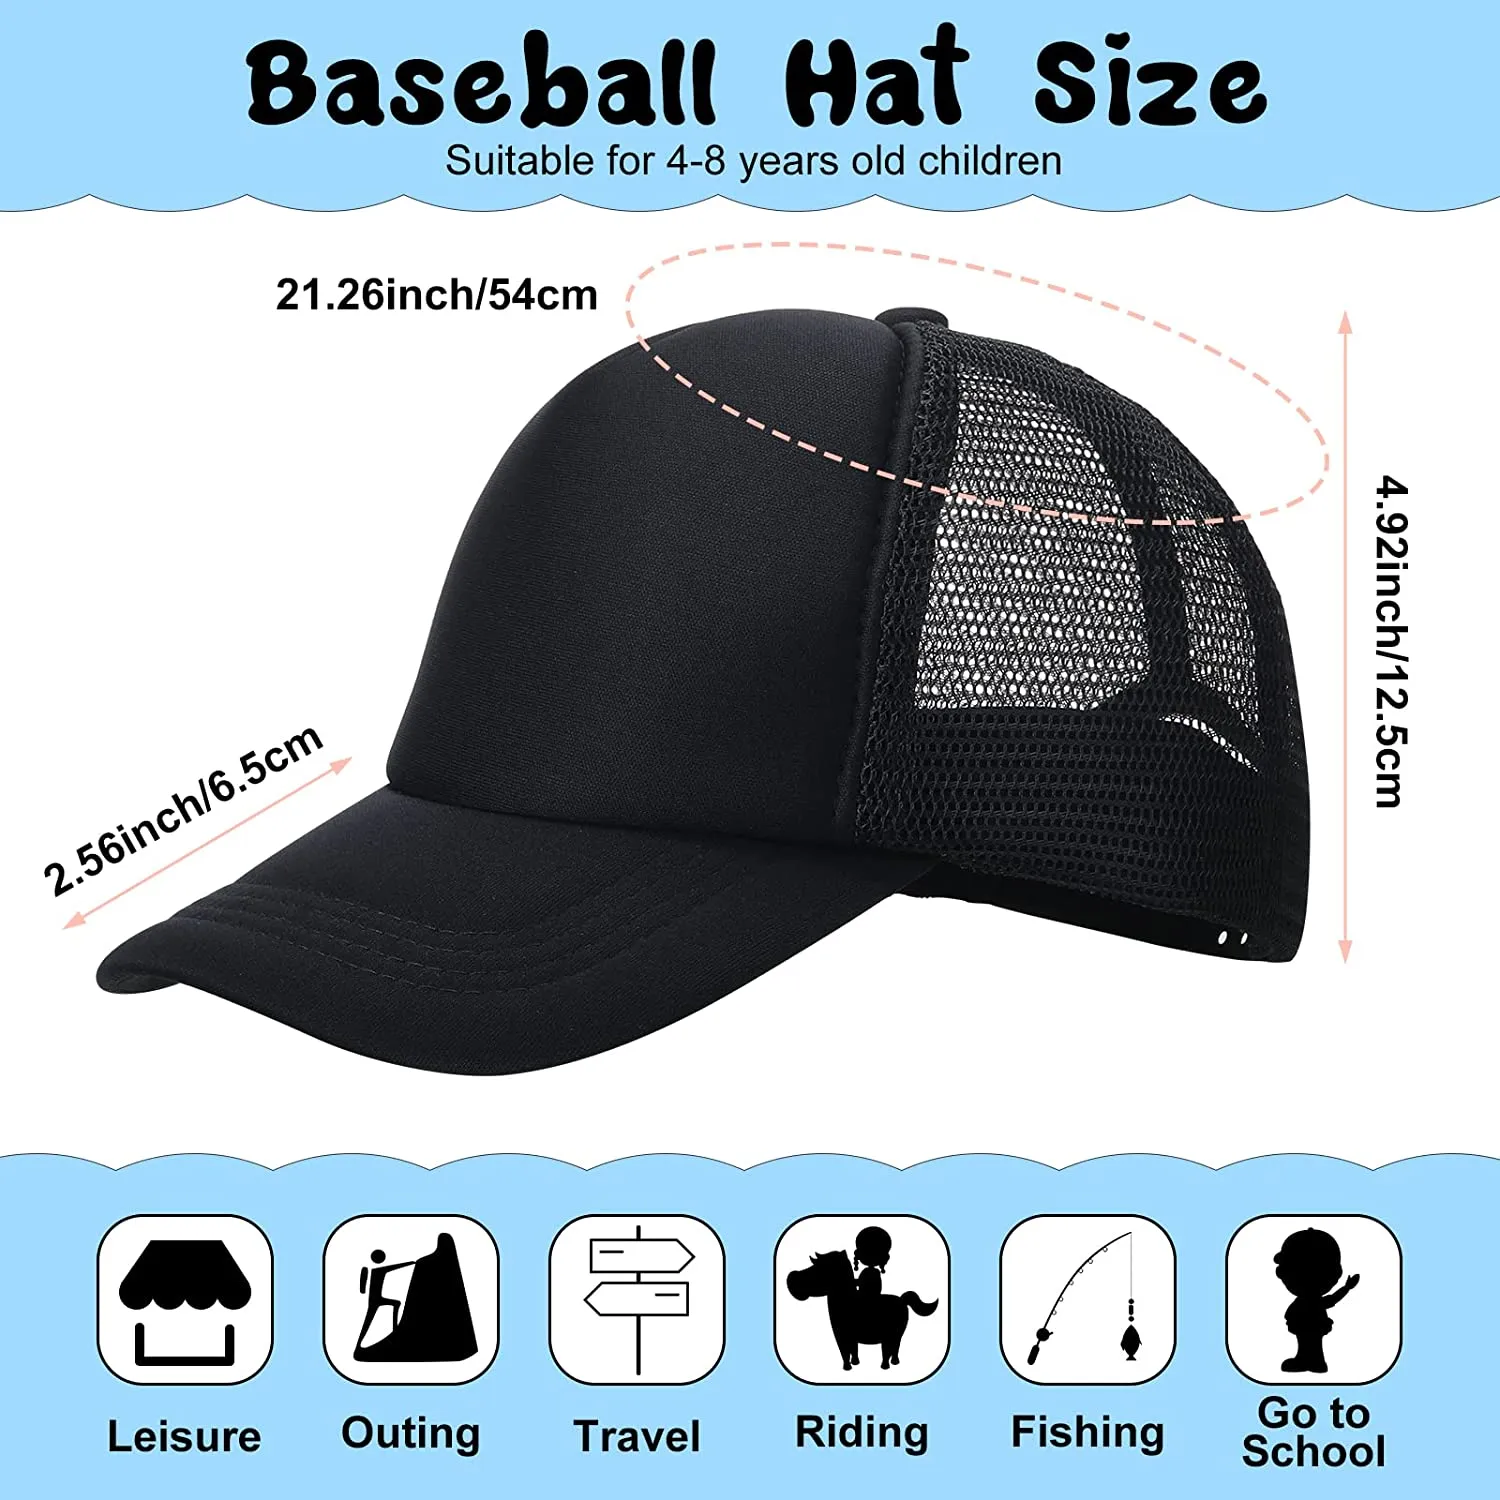 Wholesale Adjustable Mesh Back Baseball Hat For Kids And Adults Sublimation  Cap Blanks Trucker Hat Blanks For Summer, Ideal For Boys And Girls Aged 4 8  Years From Belkin, $0.9